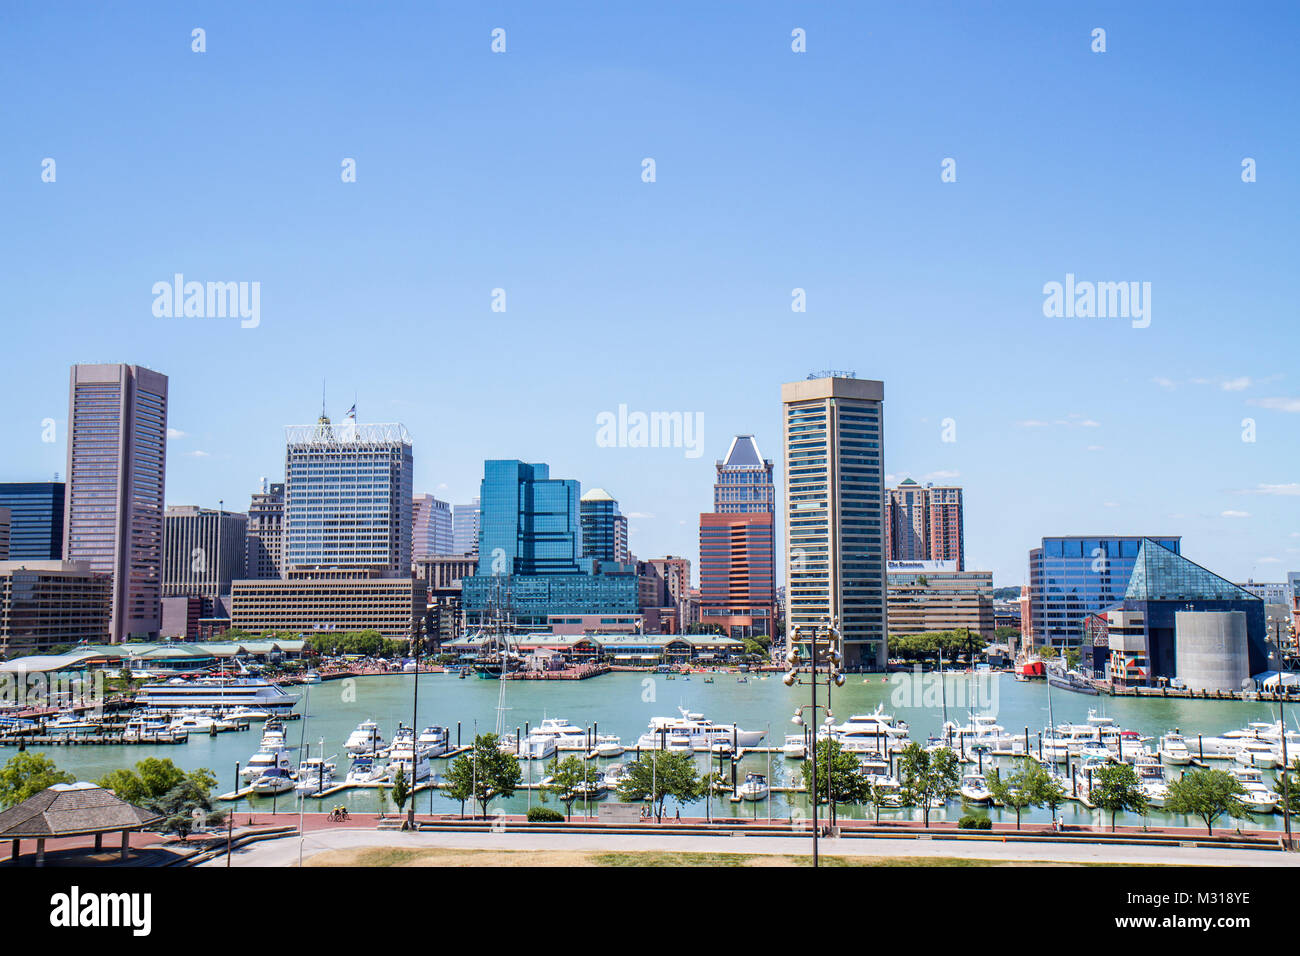 Baltimore Maryland,Federal Hill Park,Inner Harbor,harbour,Patapsco River water,port,waterfront,skyline,office building,marina,boat,view,visitors trave Stock Photo